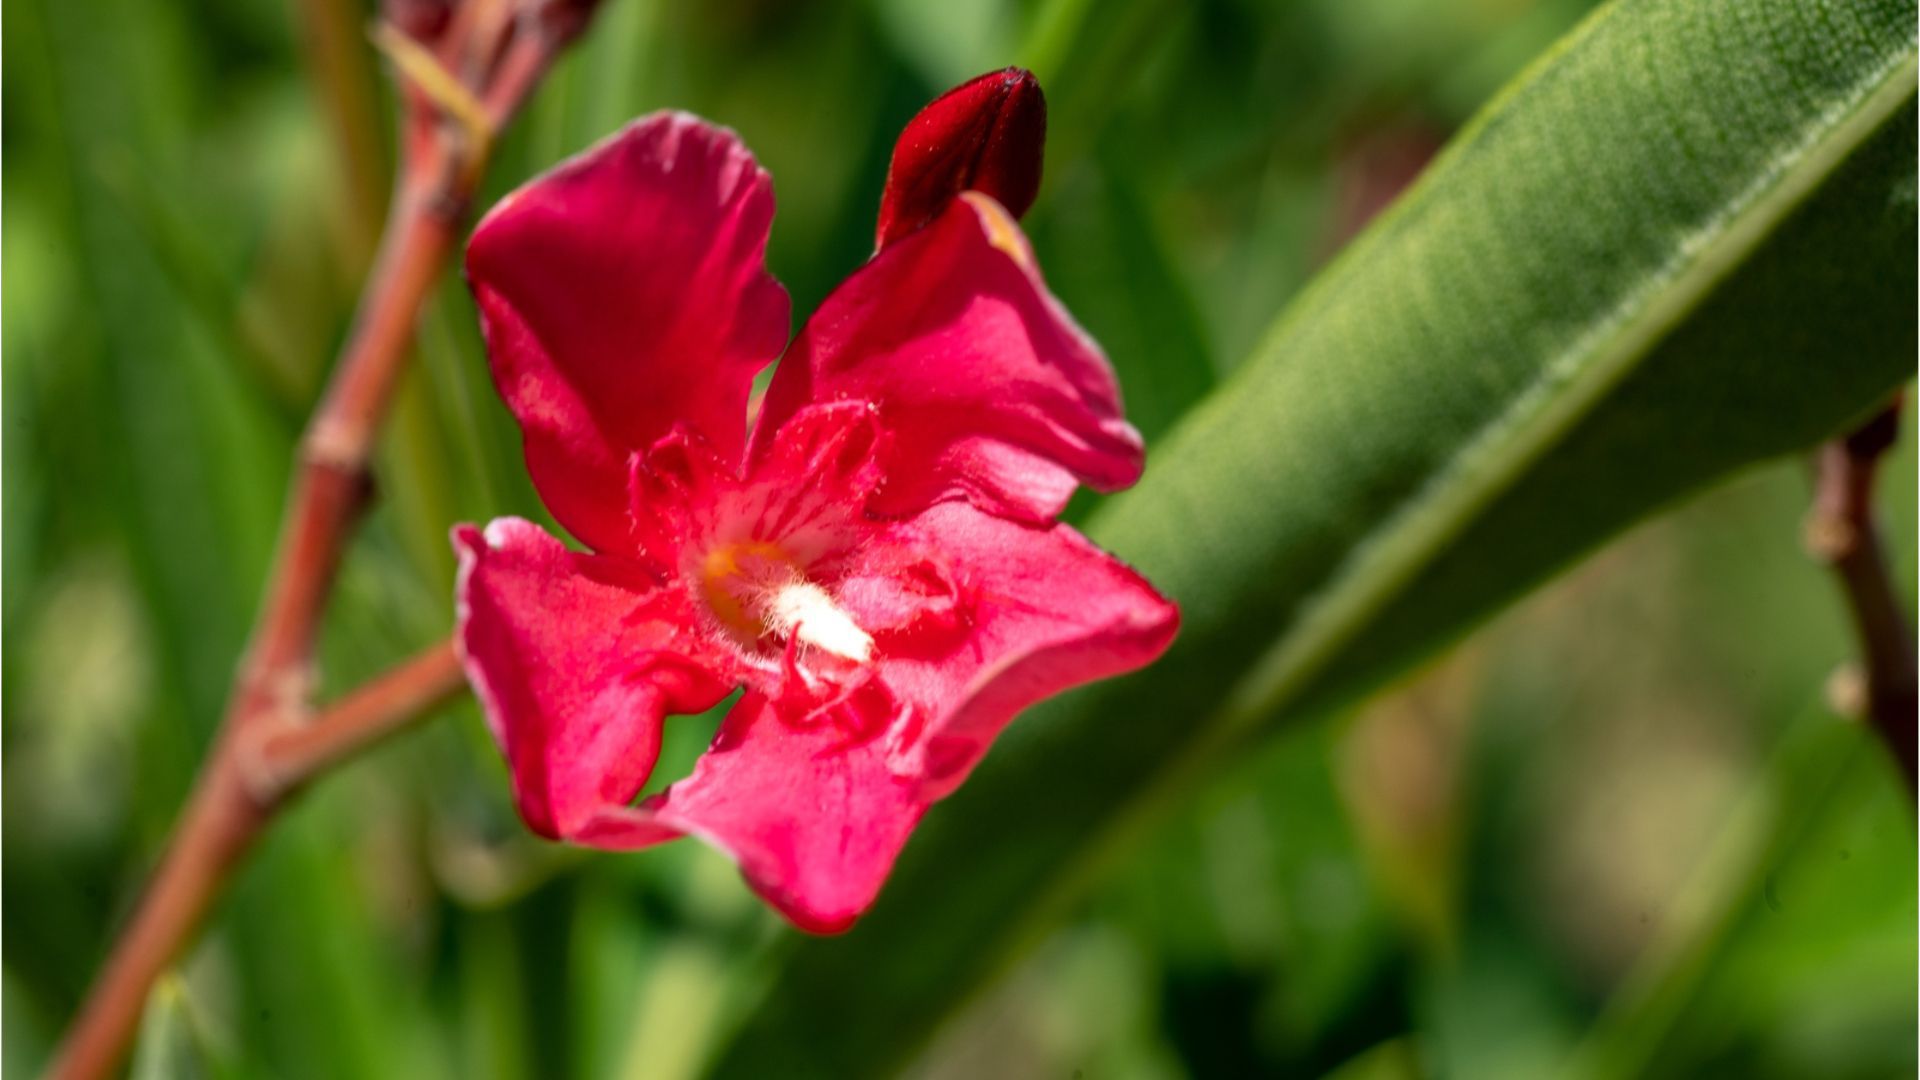 Pest infestation: How to make the oleander healthy again